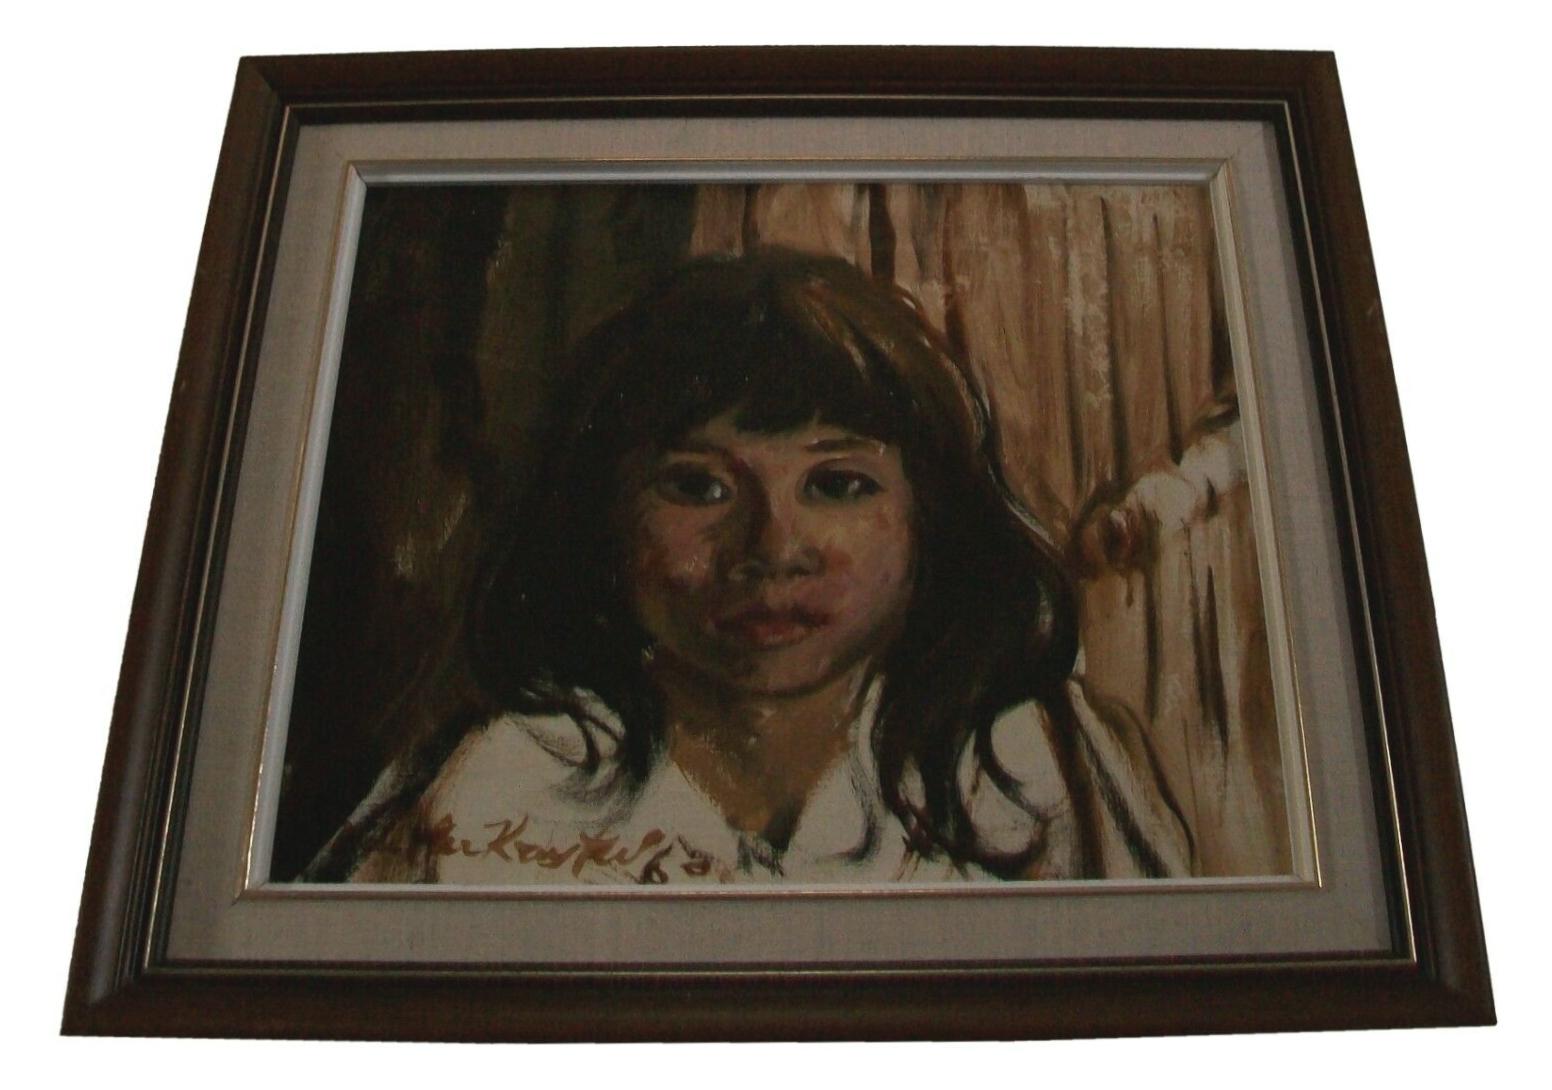 KAY YUM - Untitled (Portrait of a Mexican Girl) - Mid Century Latin American oil painting on canvas - contained in a vintage frame with linen liner - signed and dated lower left - label and exhibition notes on the stretcher - Mexico (likely) - circa